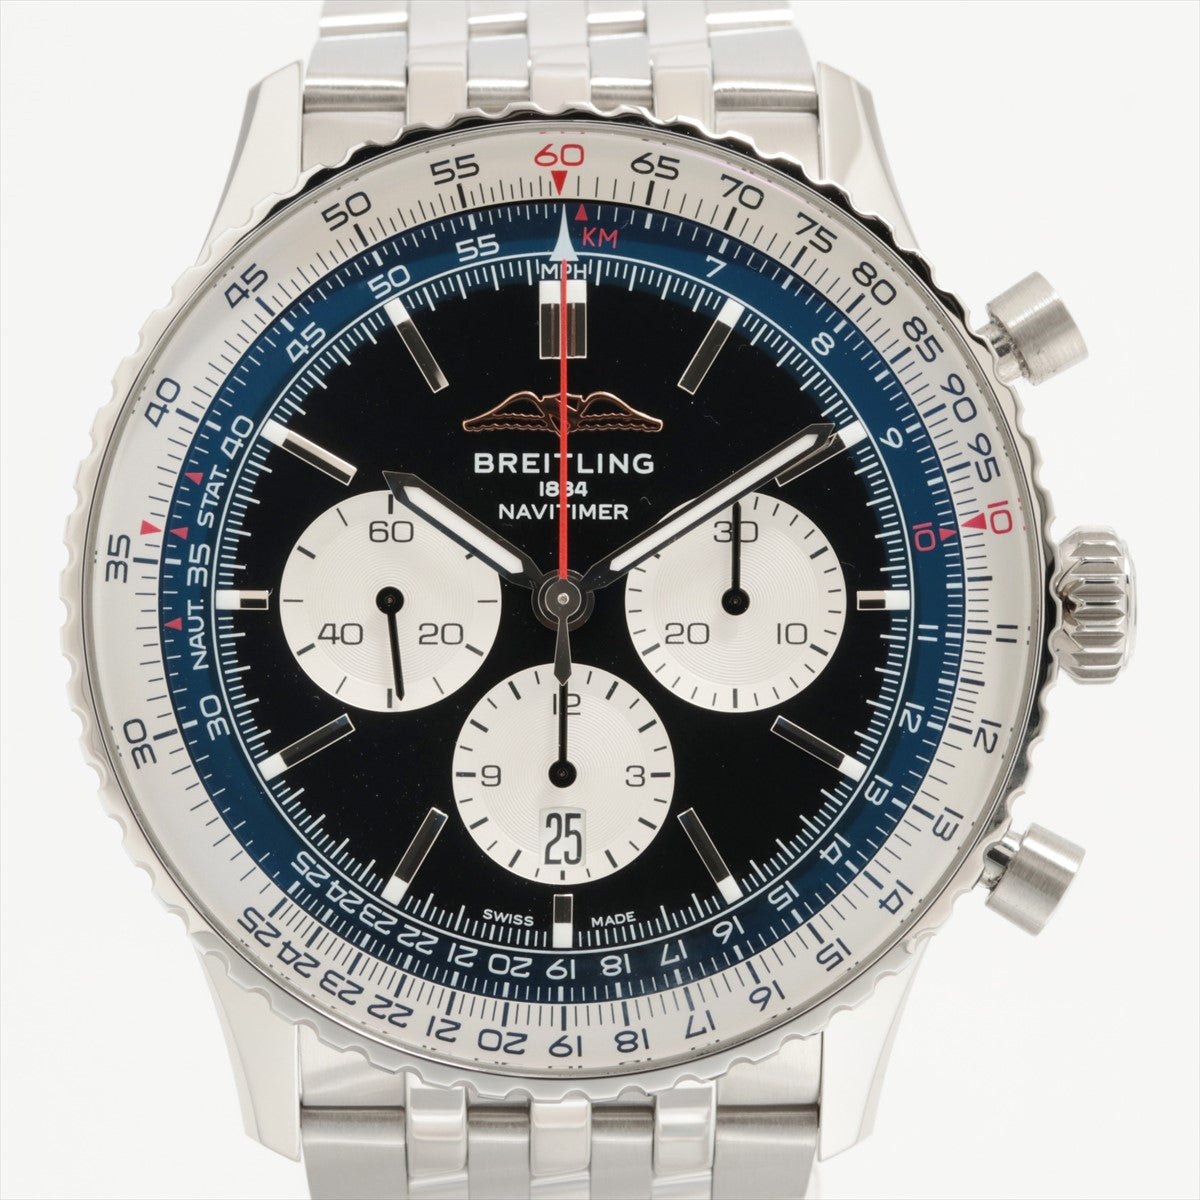 Breitling Navitimer B01 Chronograph AB0137 SS AT Black-Face Extra-Link 5